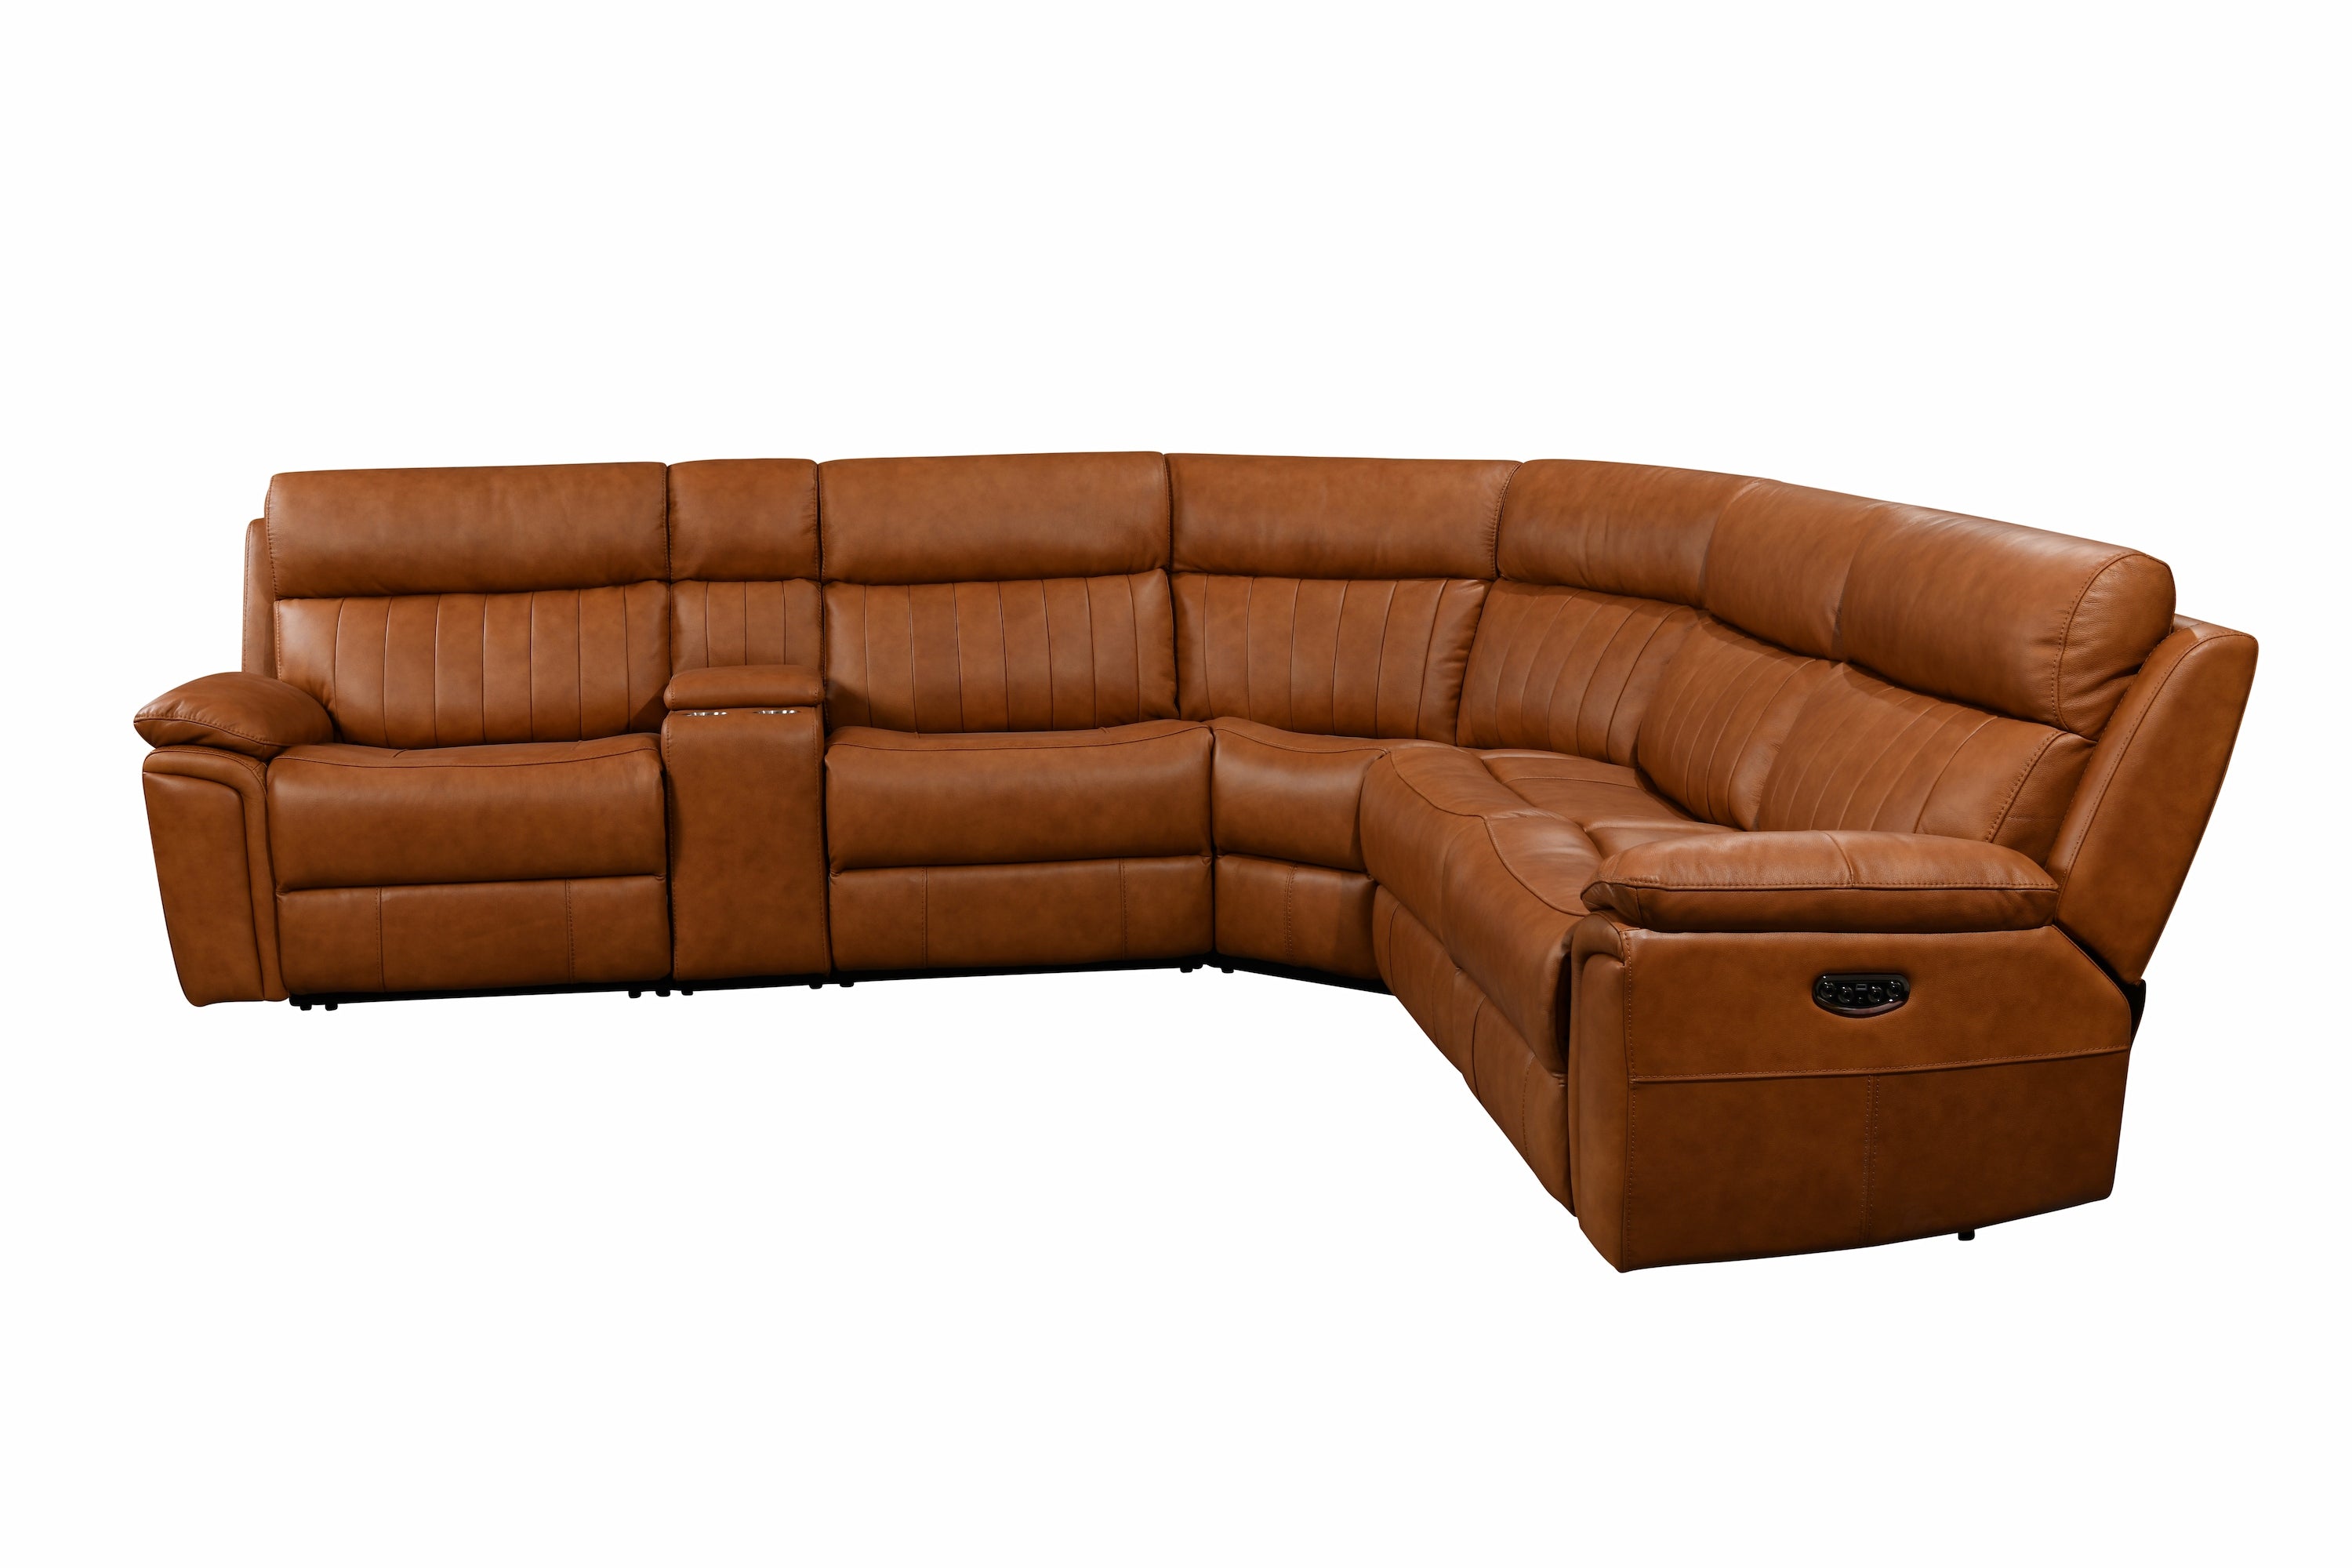 Ravello Leather Modular Corner Sofa with Power Recliners, Power Headrest, USB and Console Unit